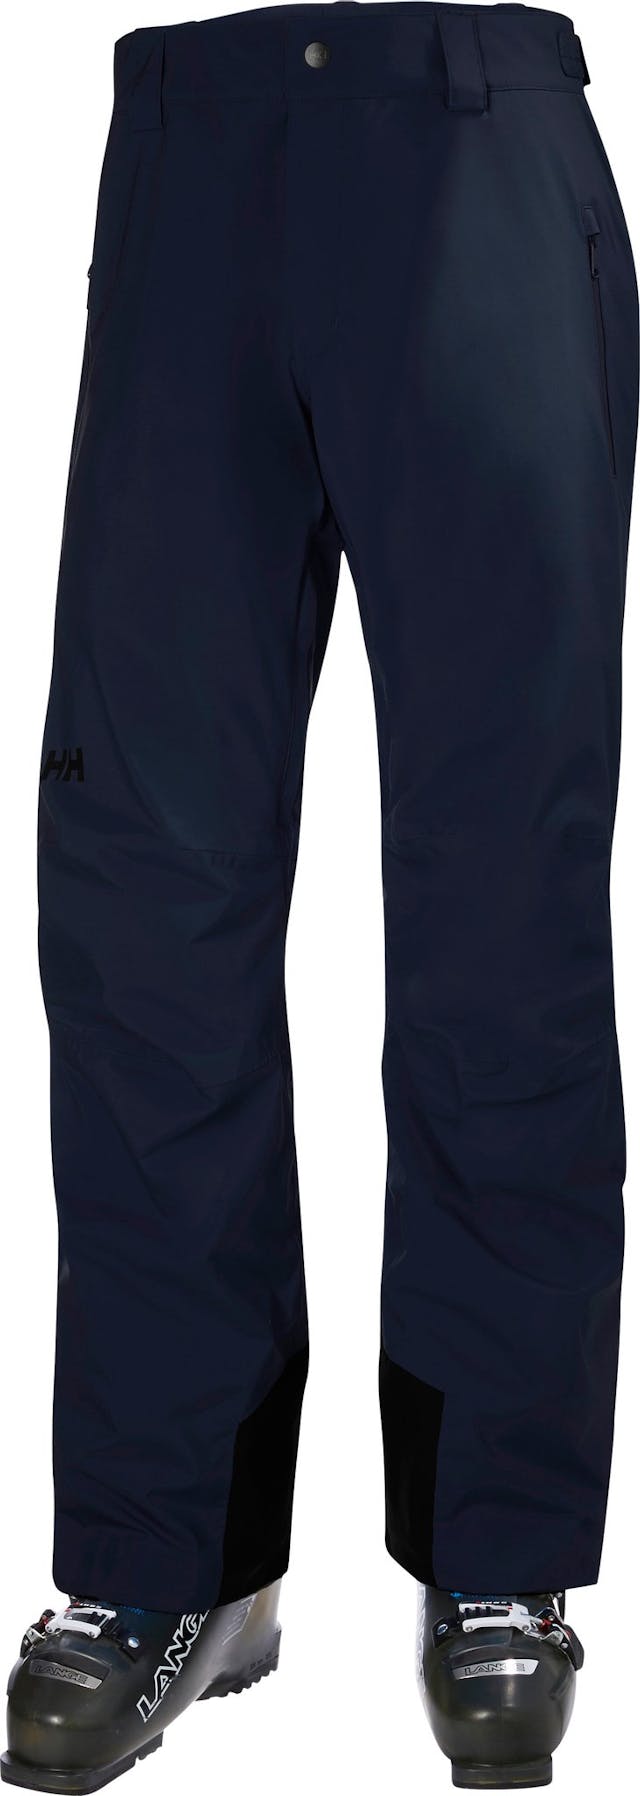 Product image for Legendary Insulated Pant - Men's